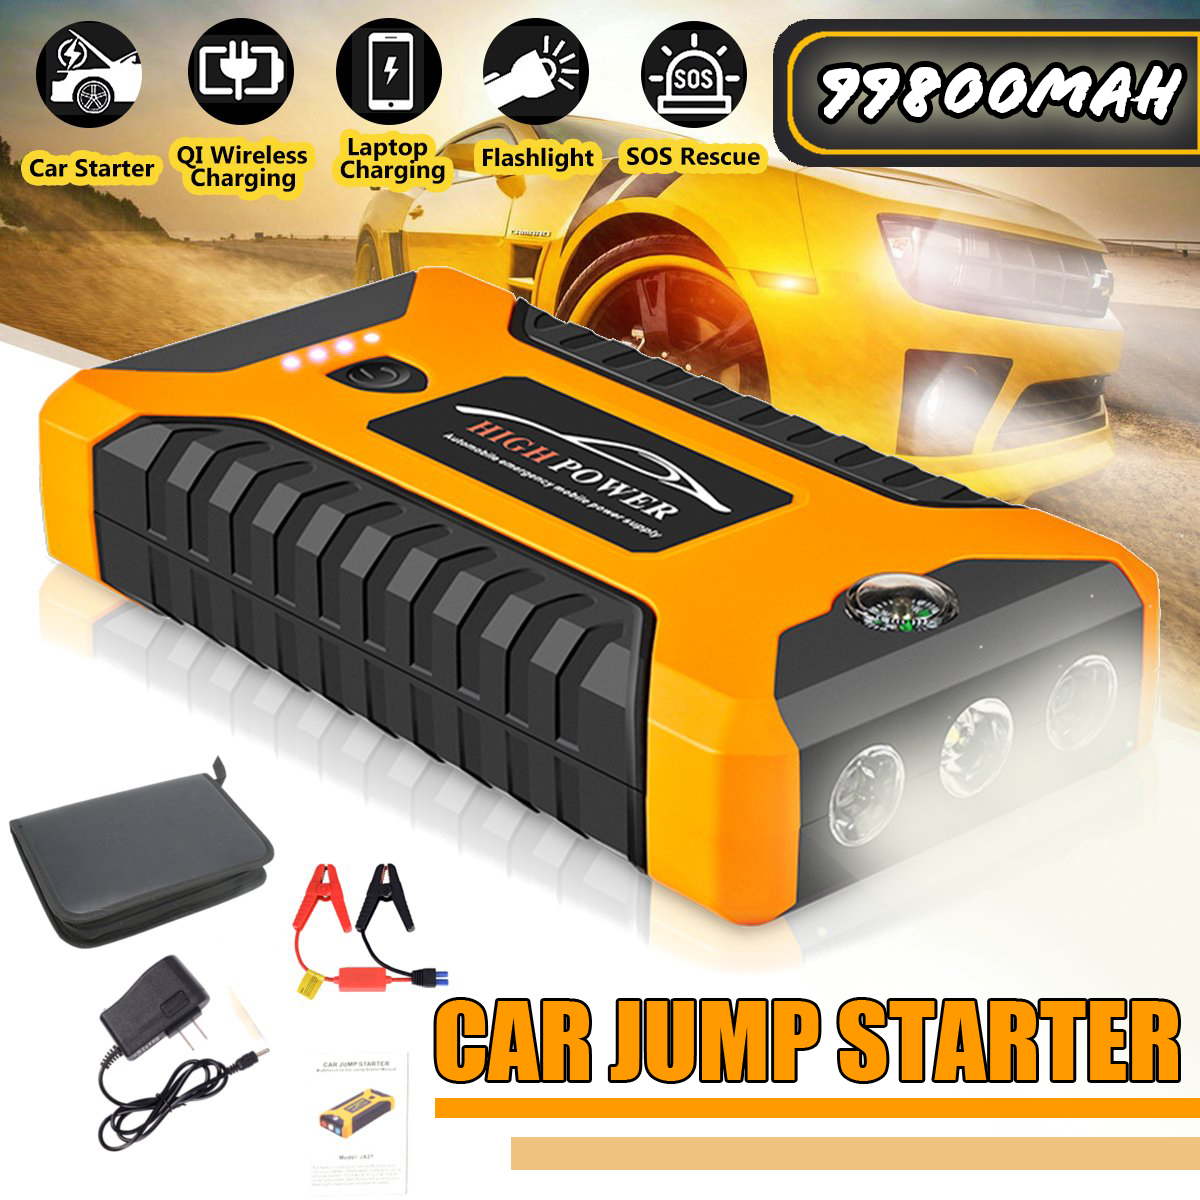 99800mah 600A Peak Car Jump Starter Lithium Battery with LED SOS Mode 12V Auto Battery Booster 15